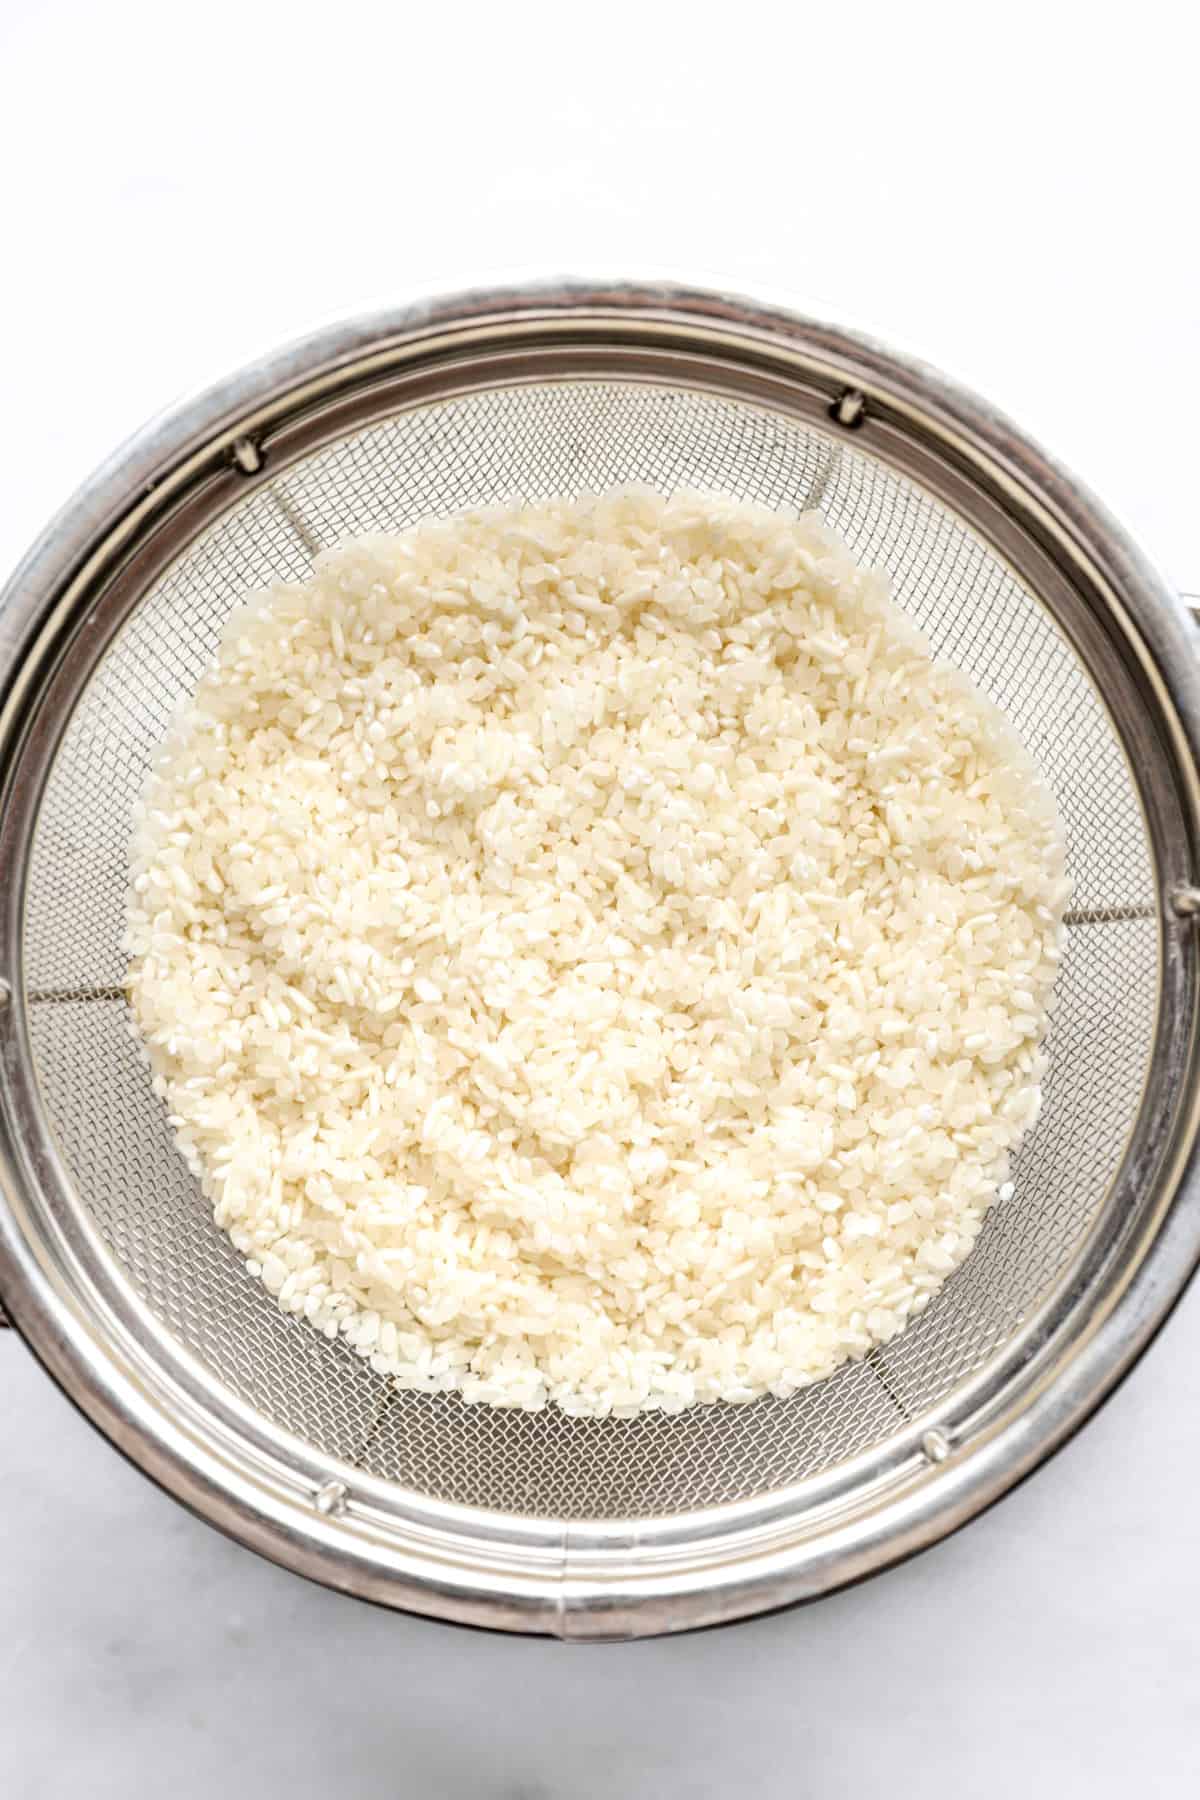 above image of rice in a strainer.